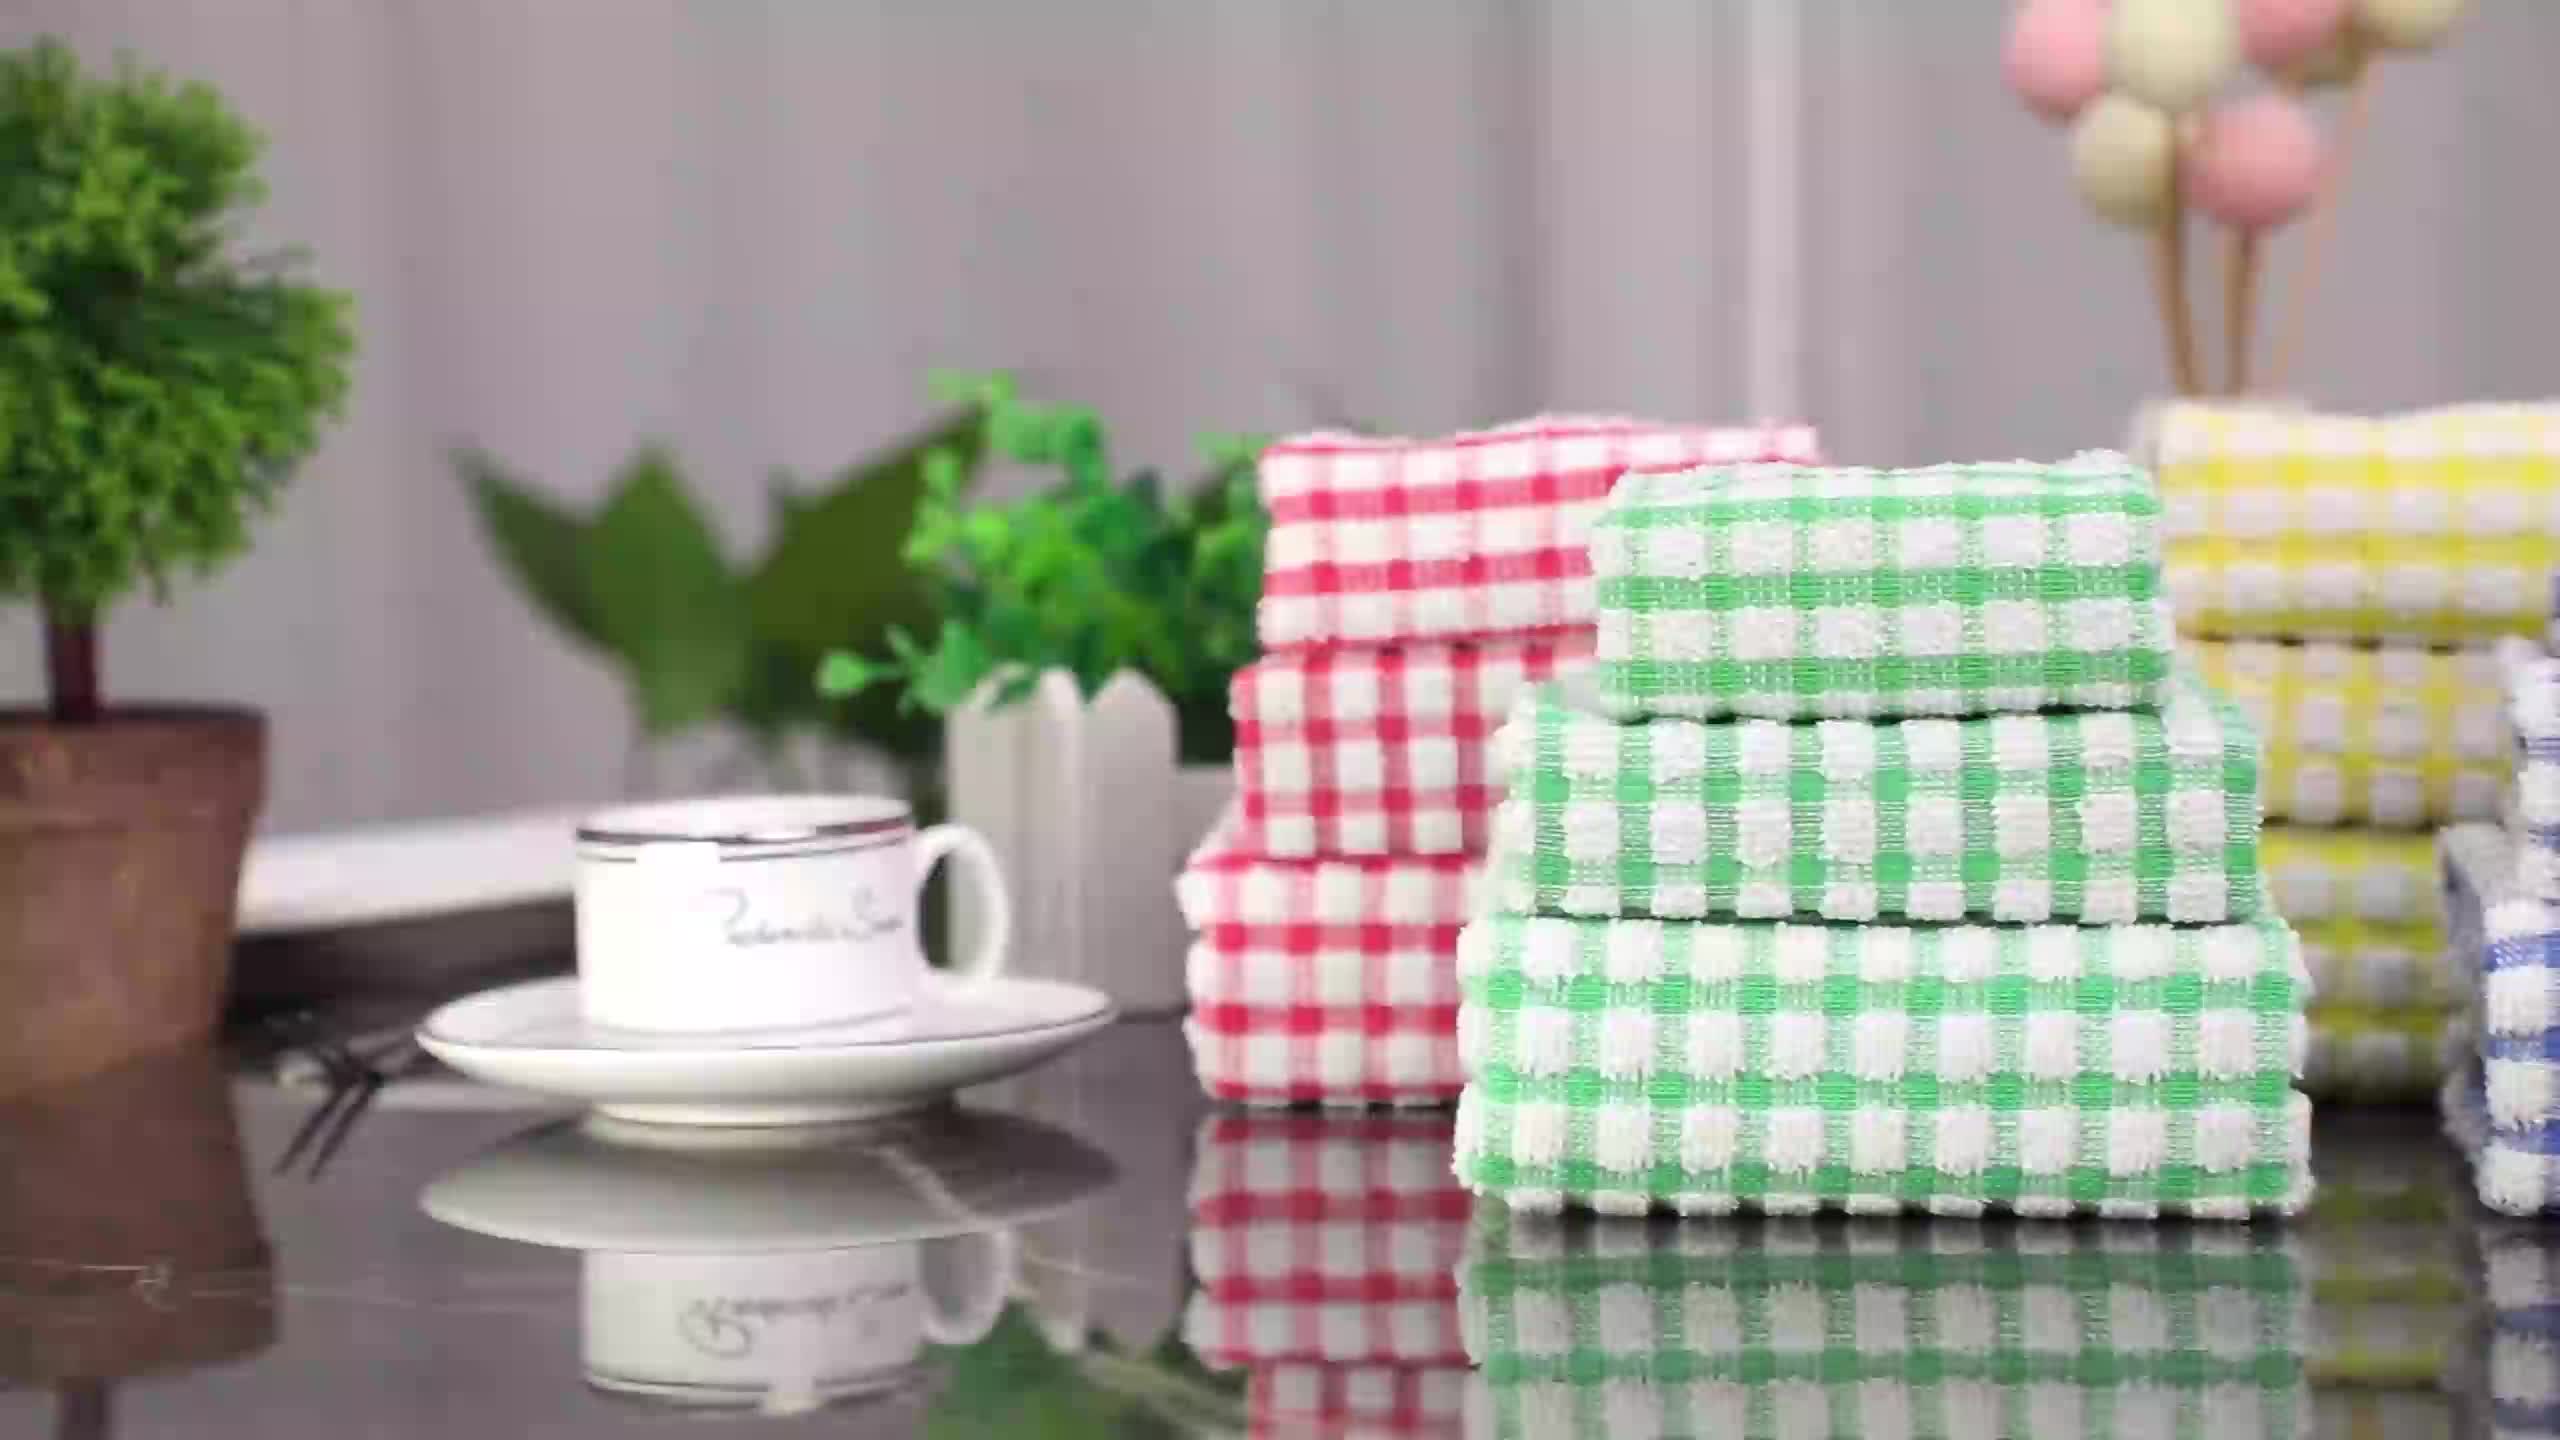 Dish Cloth, Kitchen Light And Thin Dish Towel, Scouring Pad, Tea Towel,  Quick Drying And Easy To Wash,, Dishwashing Towel, Cleaning Cloth, Pad, Cleaning  Rags, Kitchen Supplies - Temu